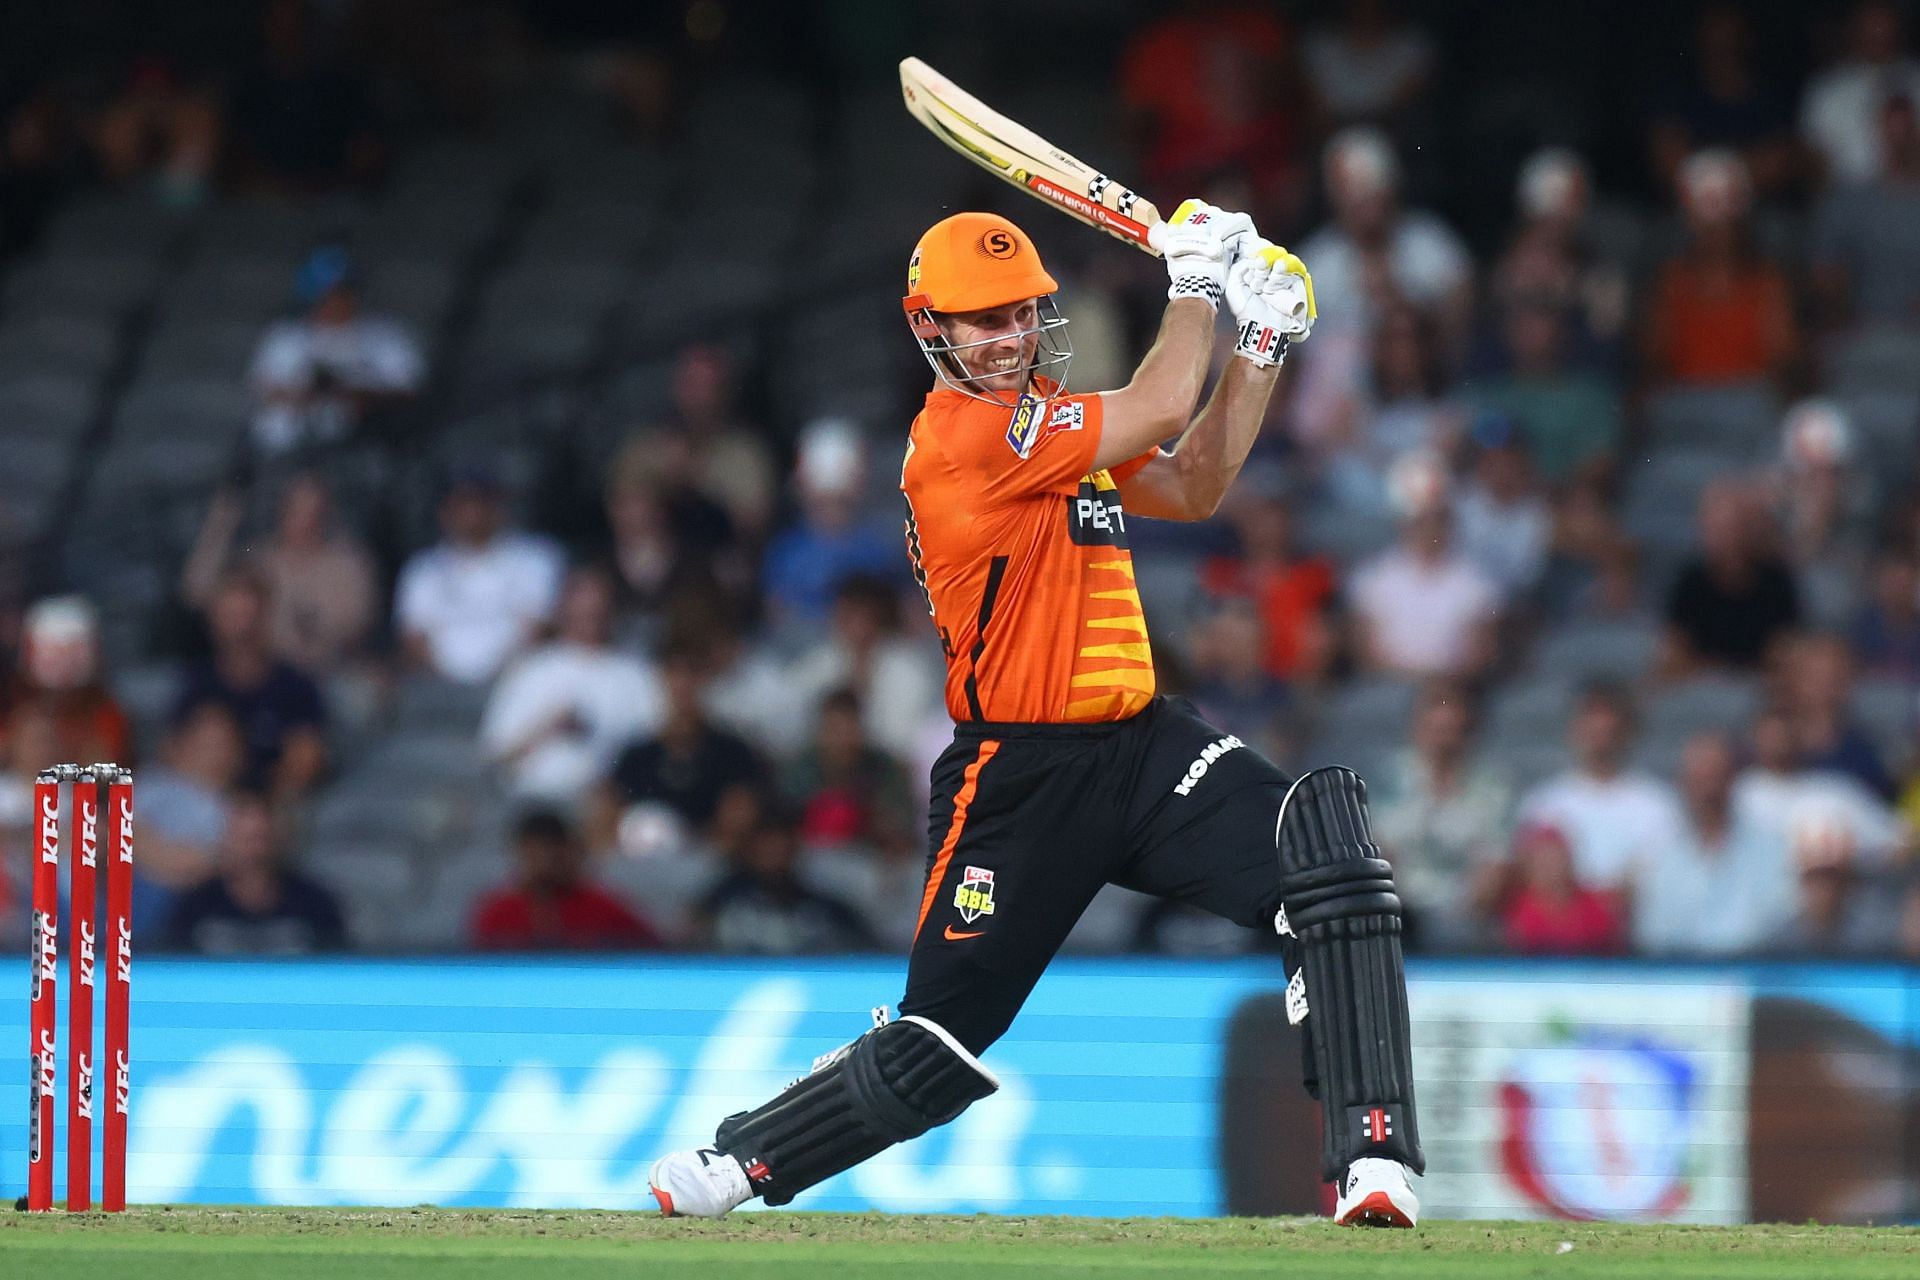 Mitchell Marsh in the Big Bash League. Pic: Getty Images